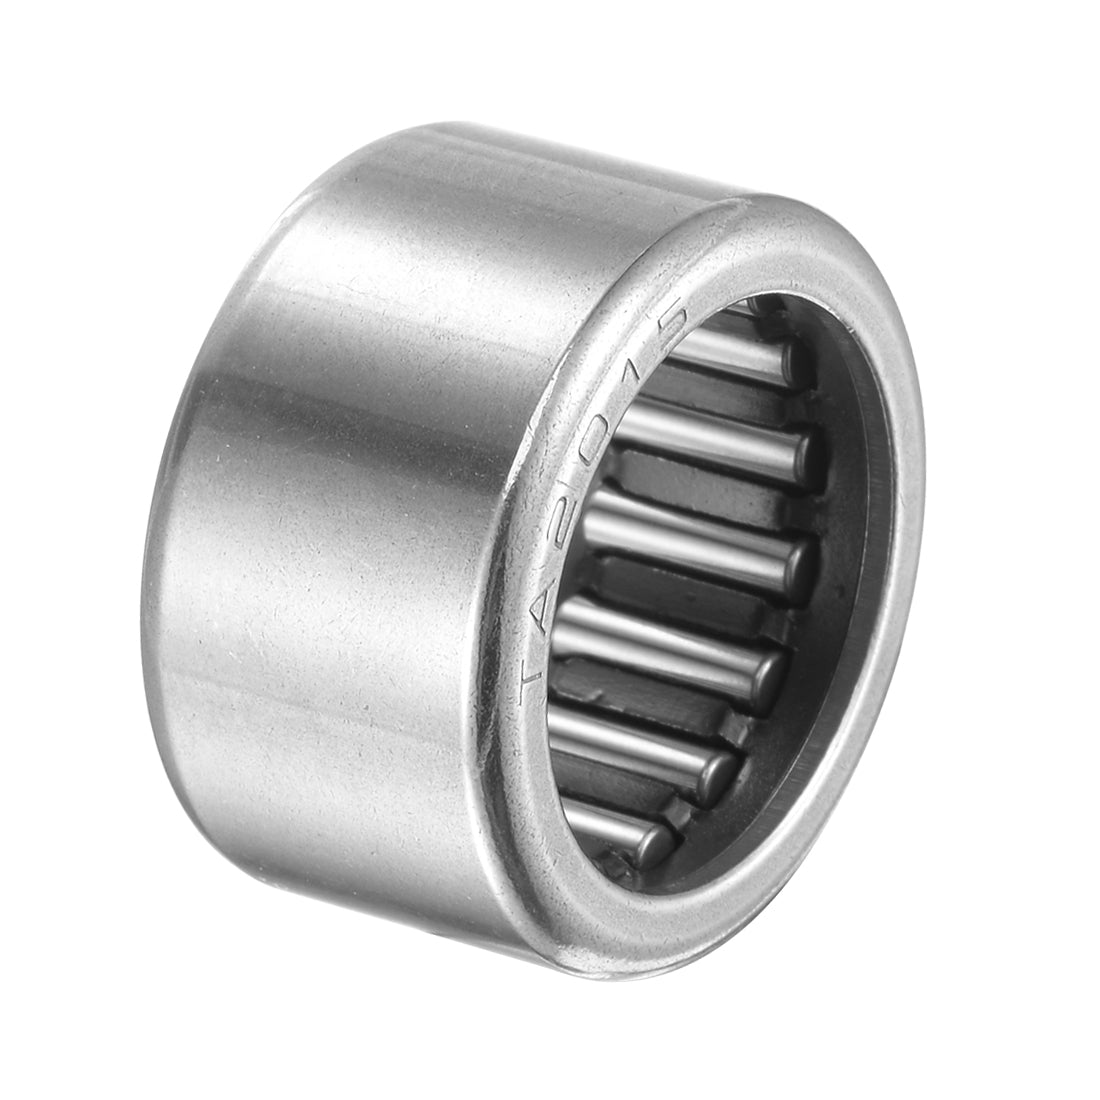 uxcell Uxcell TA1512 Needle Roller Bearings 15mm x 22mm x 12mm Chrome Steel Open End